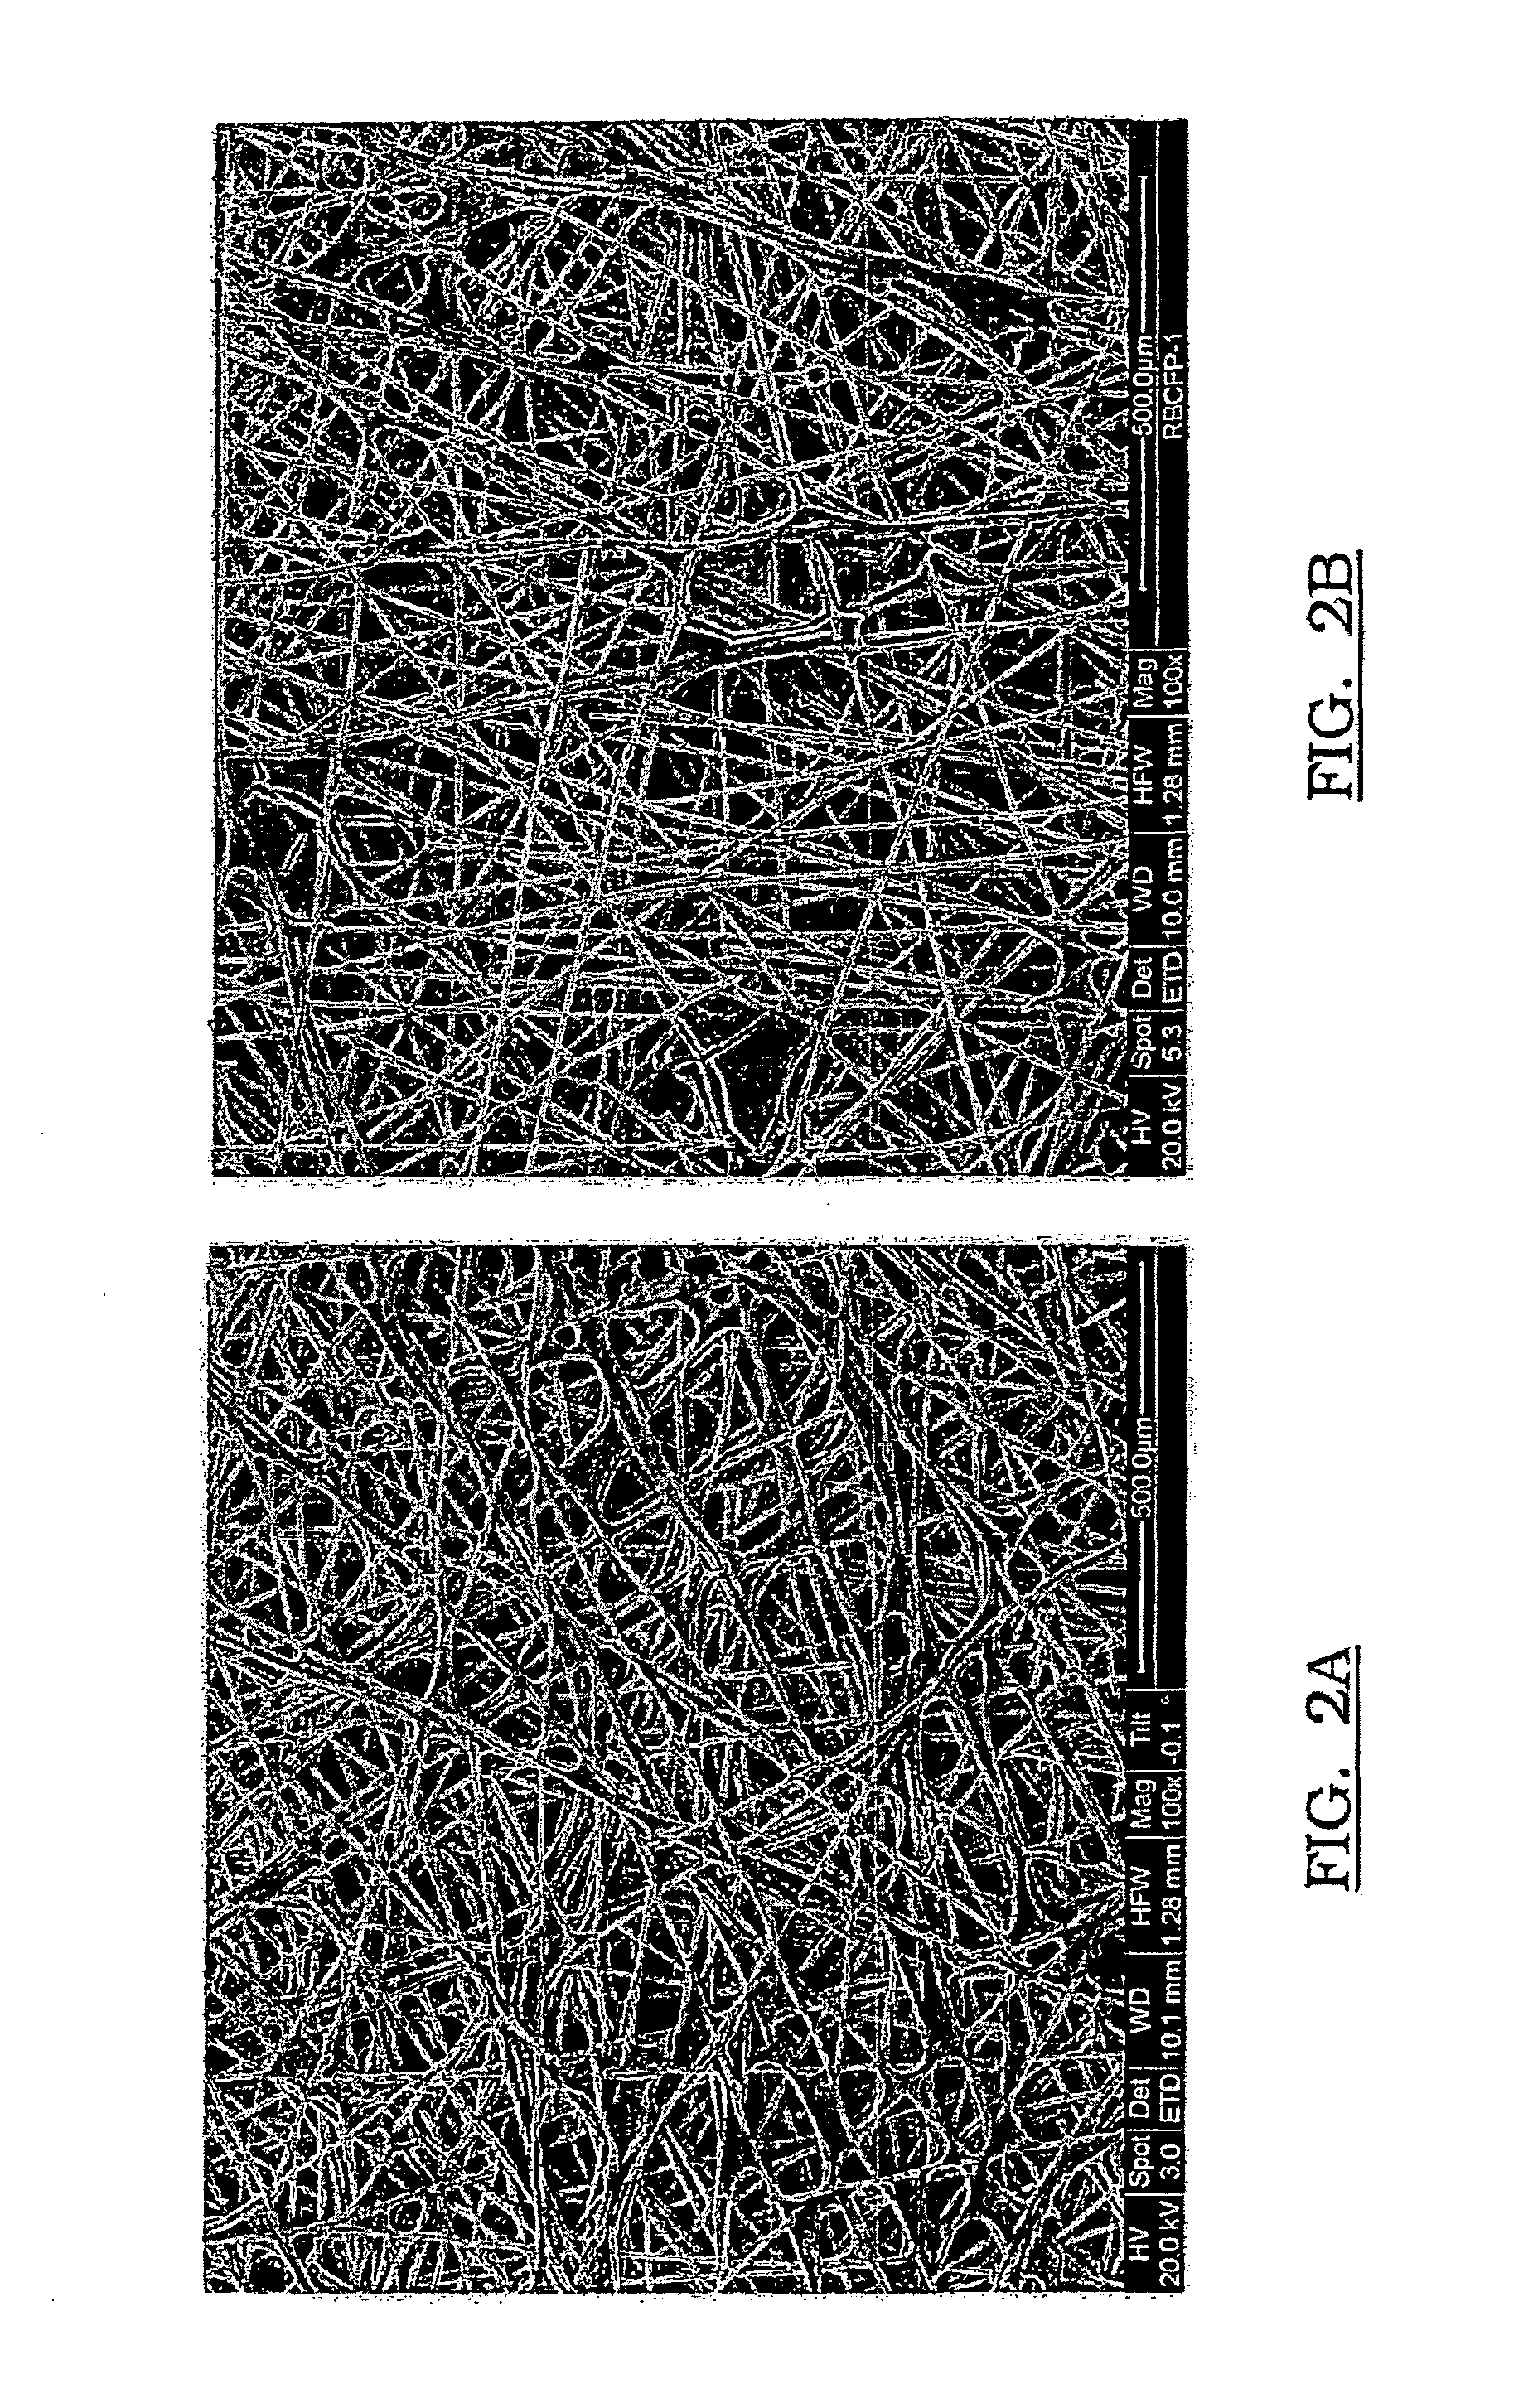 Method of preparing gas diffusion media for a fuel cell